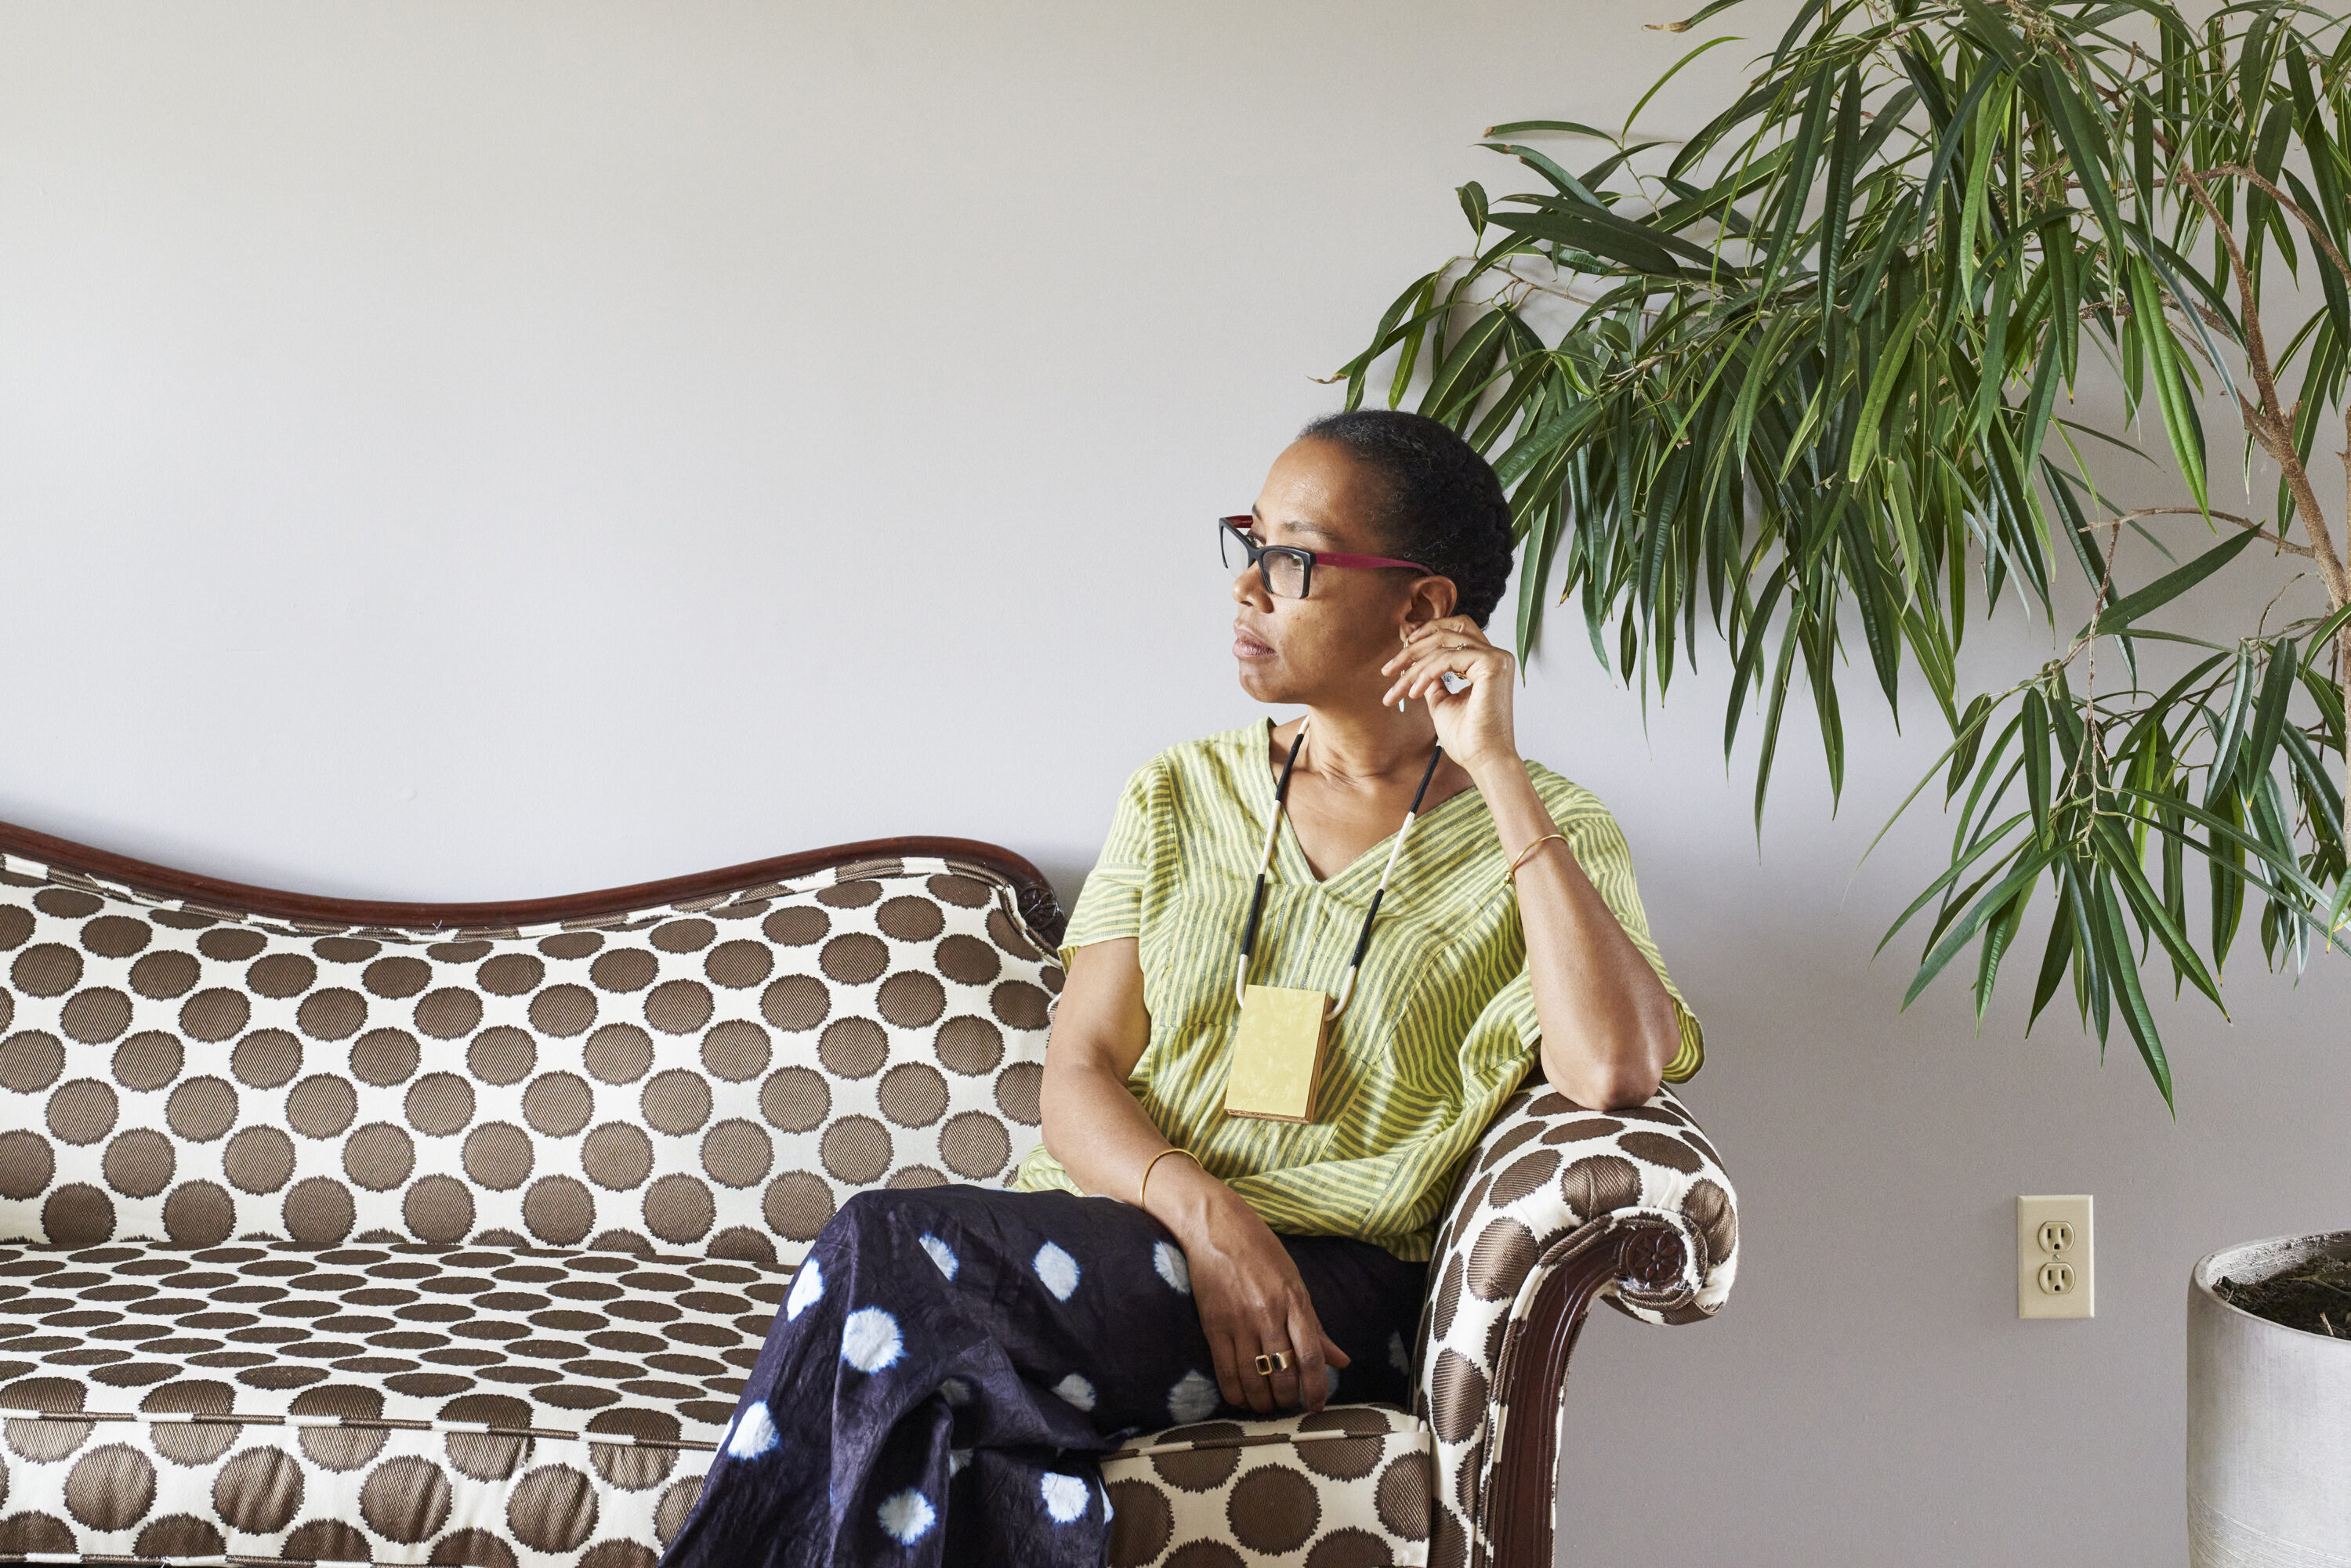 Sonya Clark calmly sits on a polka-dot couch against a white wall, next to a large plant. She is a medium-skinned adult woman with dark hair pulled back, looking to her right with her legs crossed. She wears a striped top, black pants with large white dots, glasses, and a necklace.